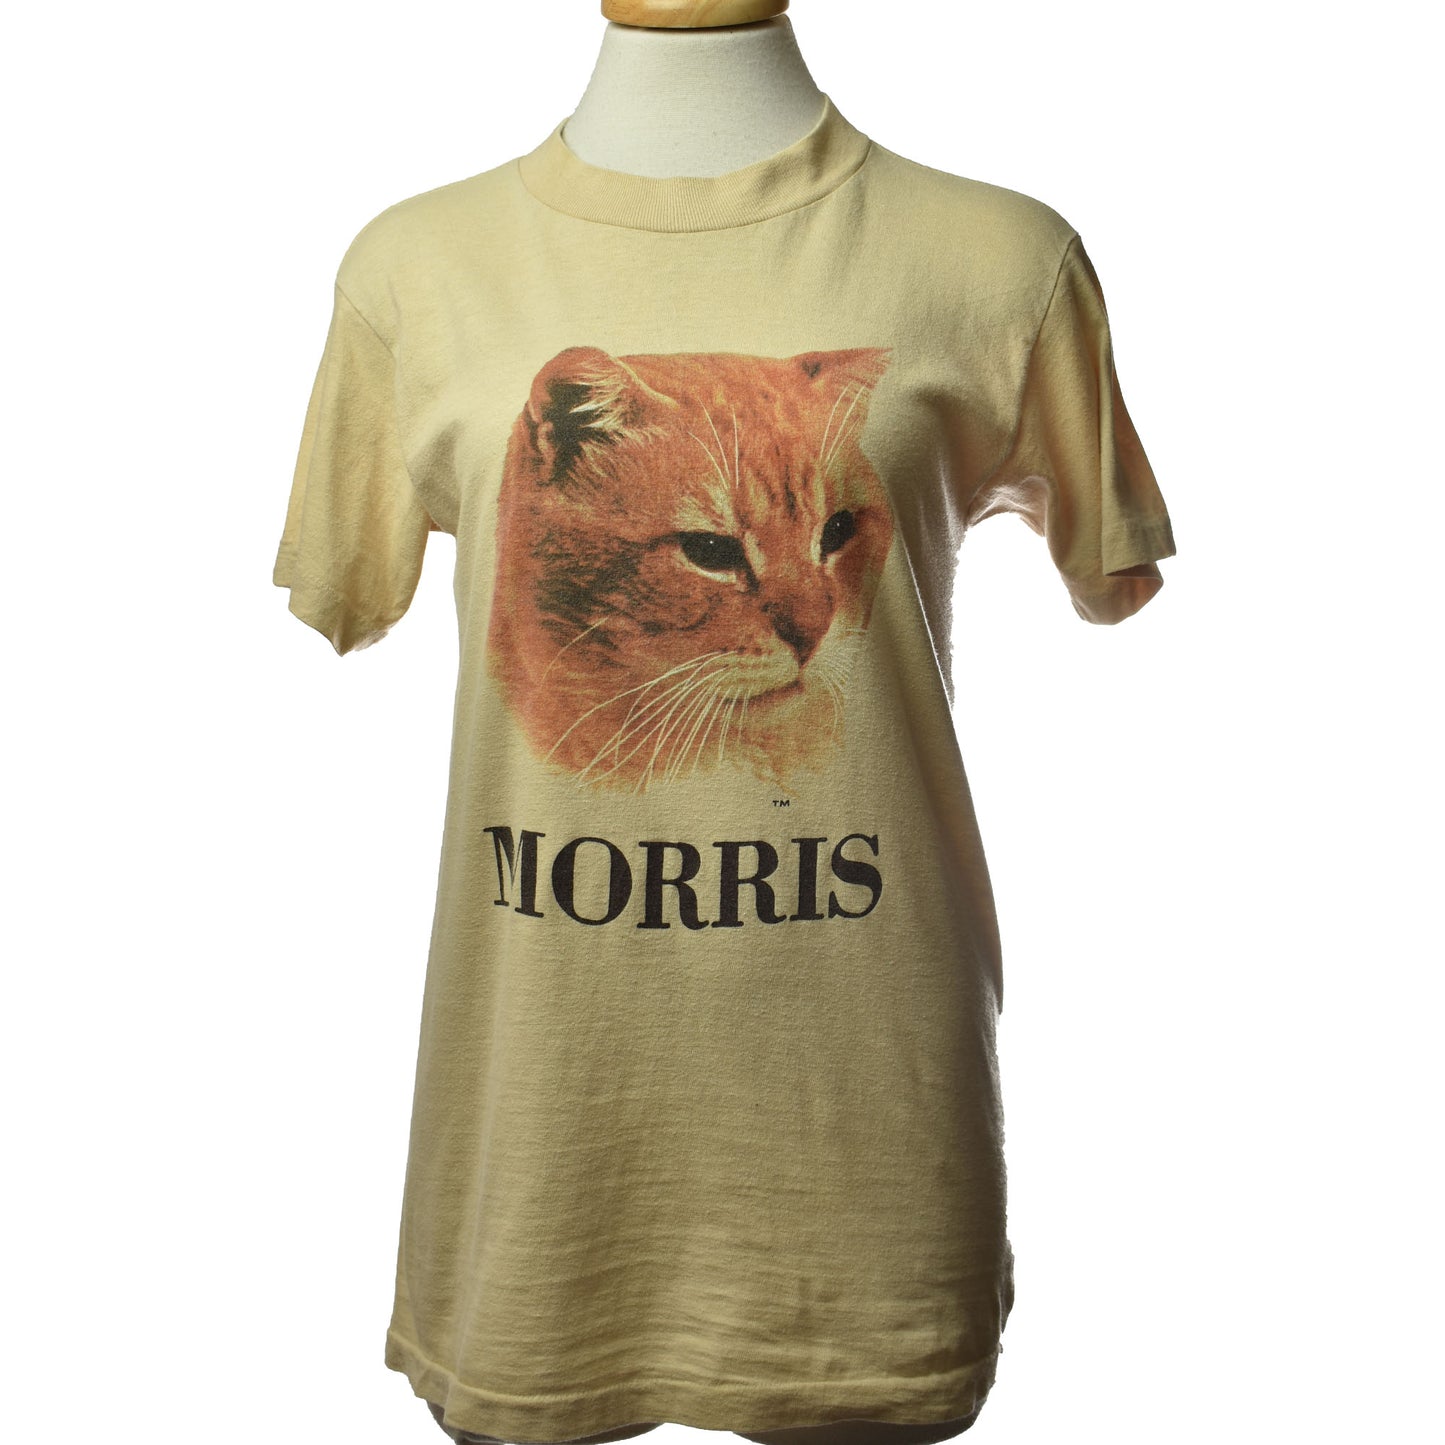 Vintage 90's Single Stitch Morris the Cat Tee 100% Cotton Made in USA